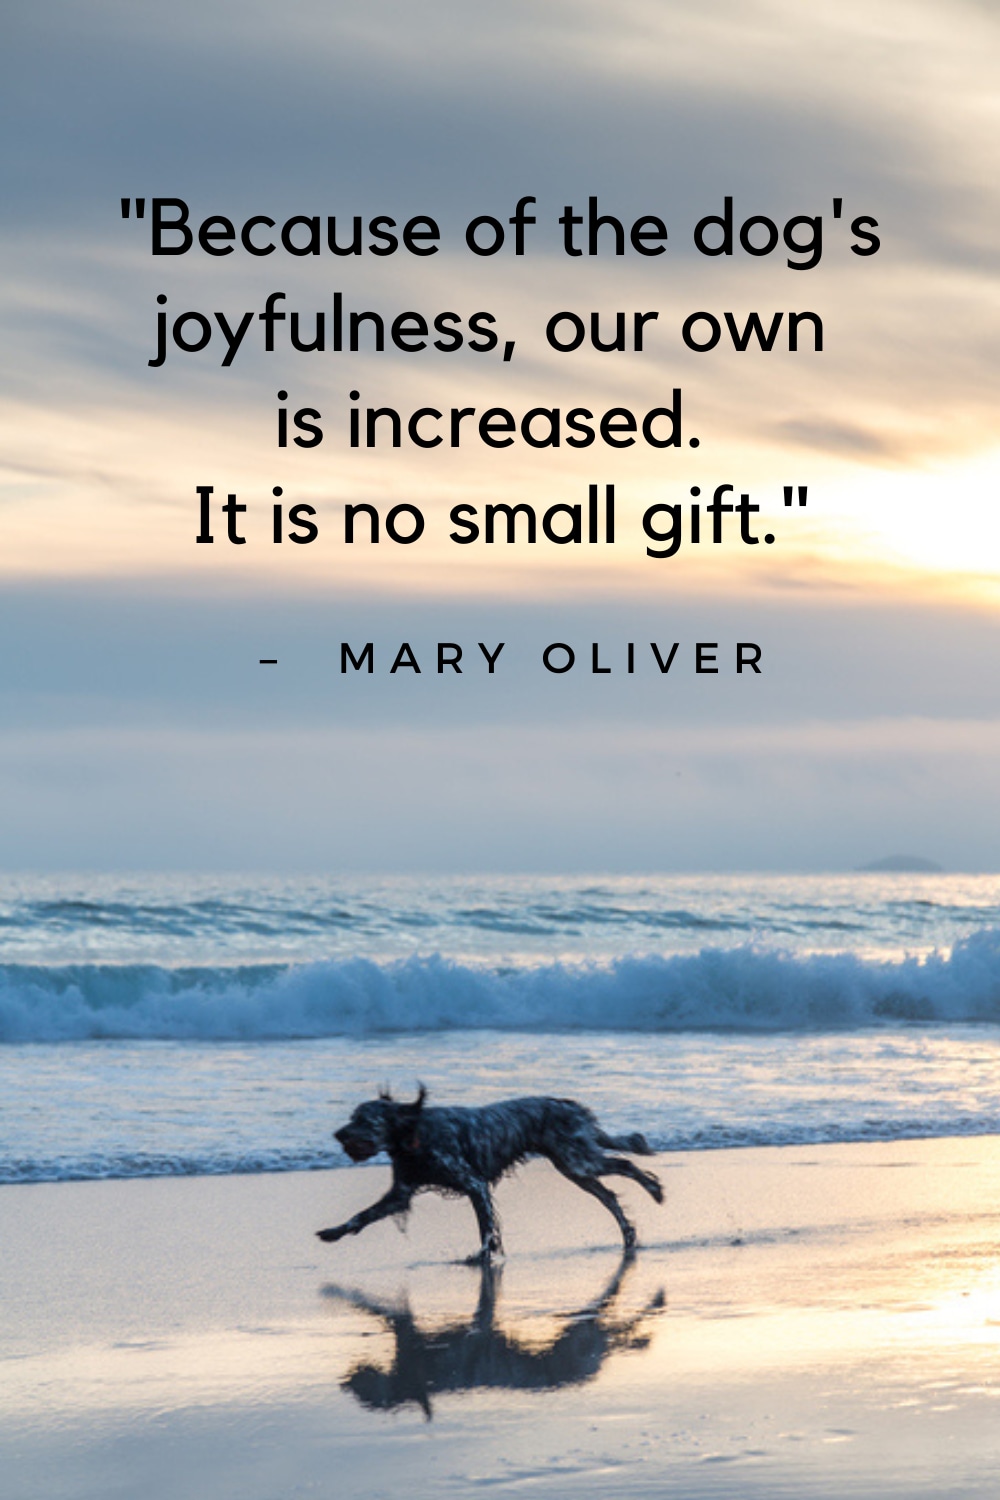 Quotes on dogs